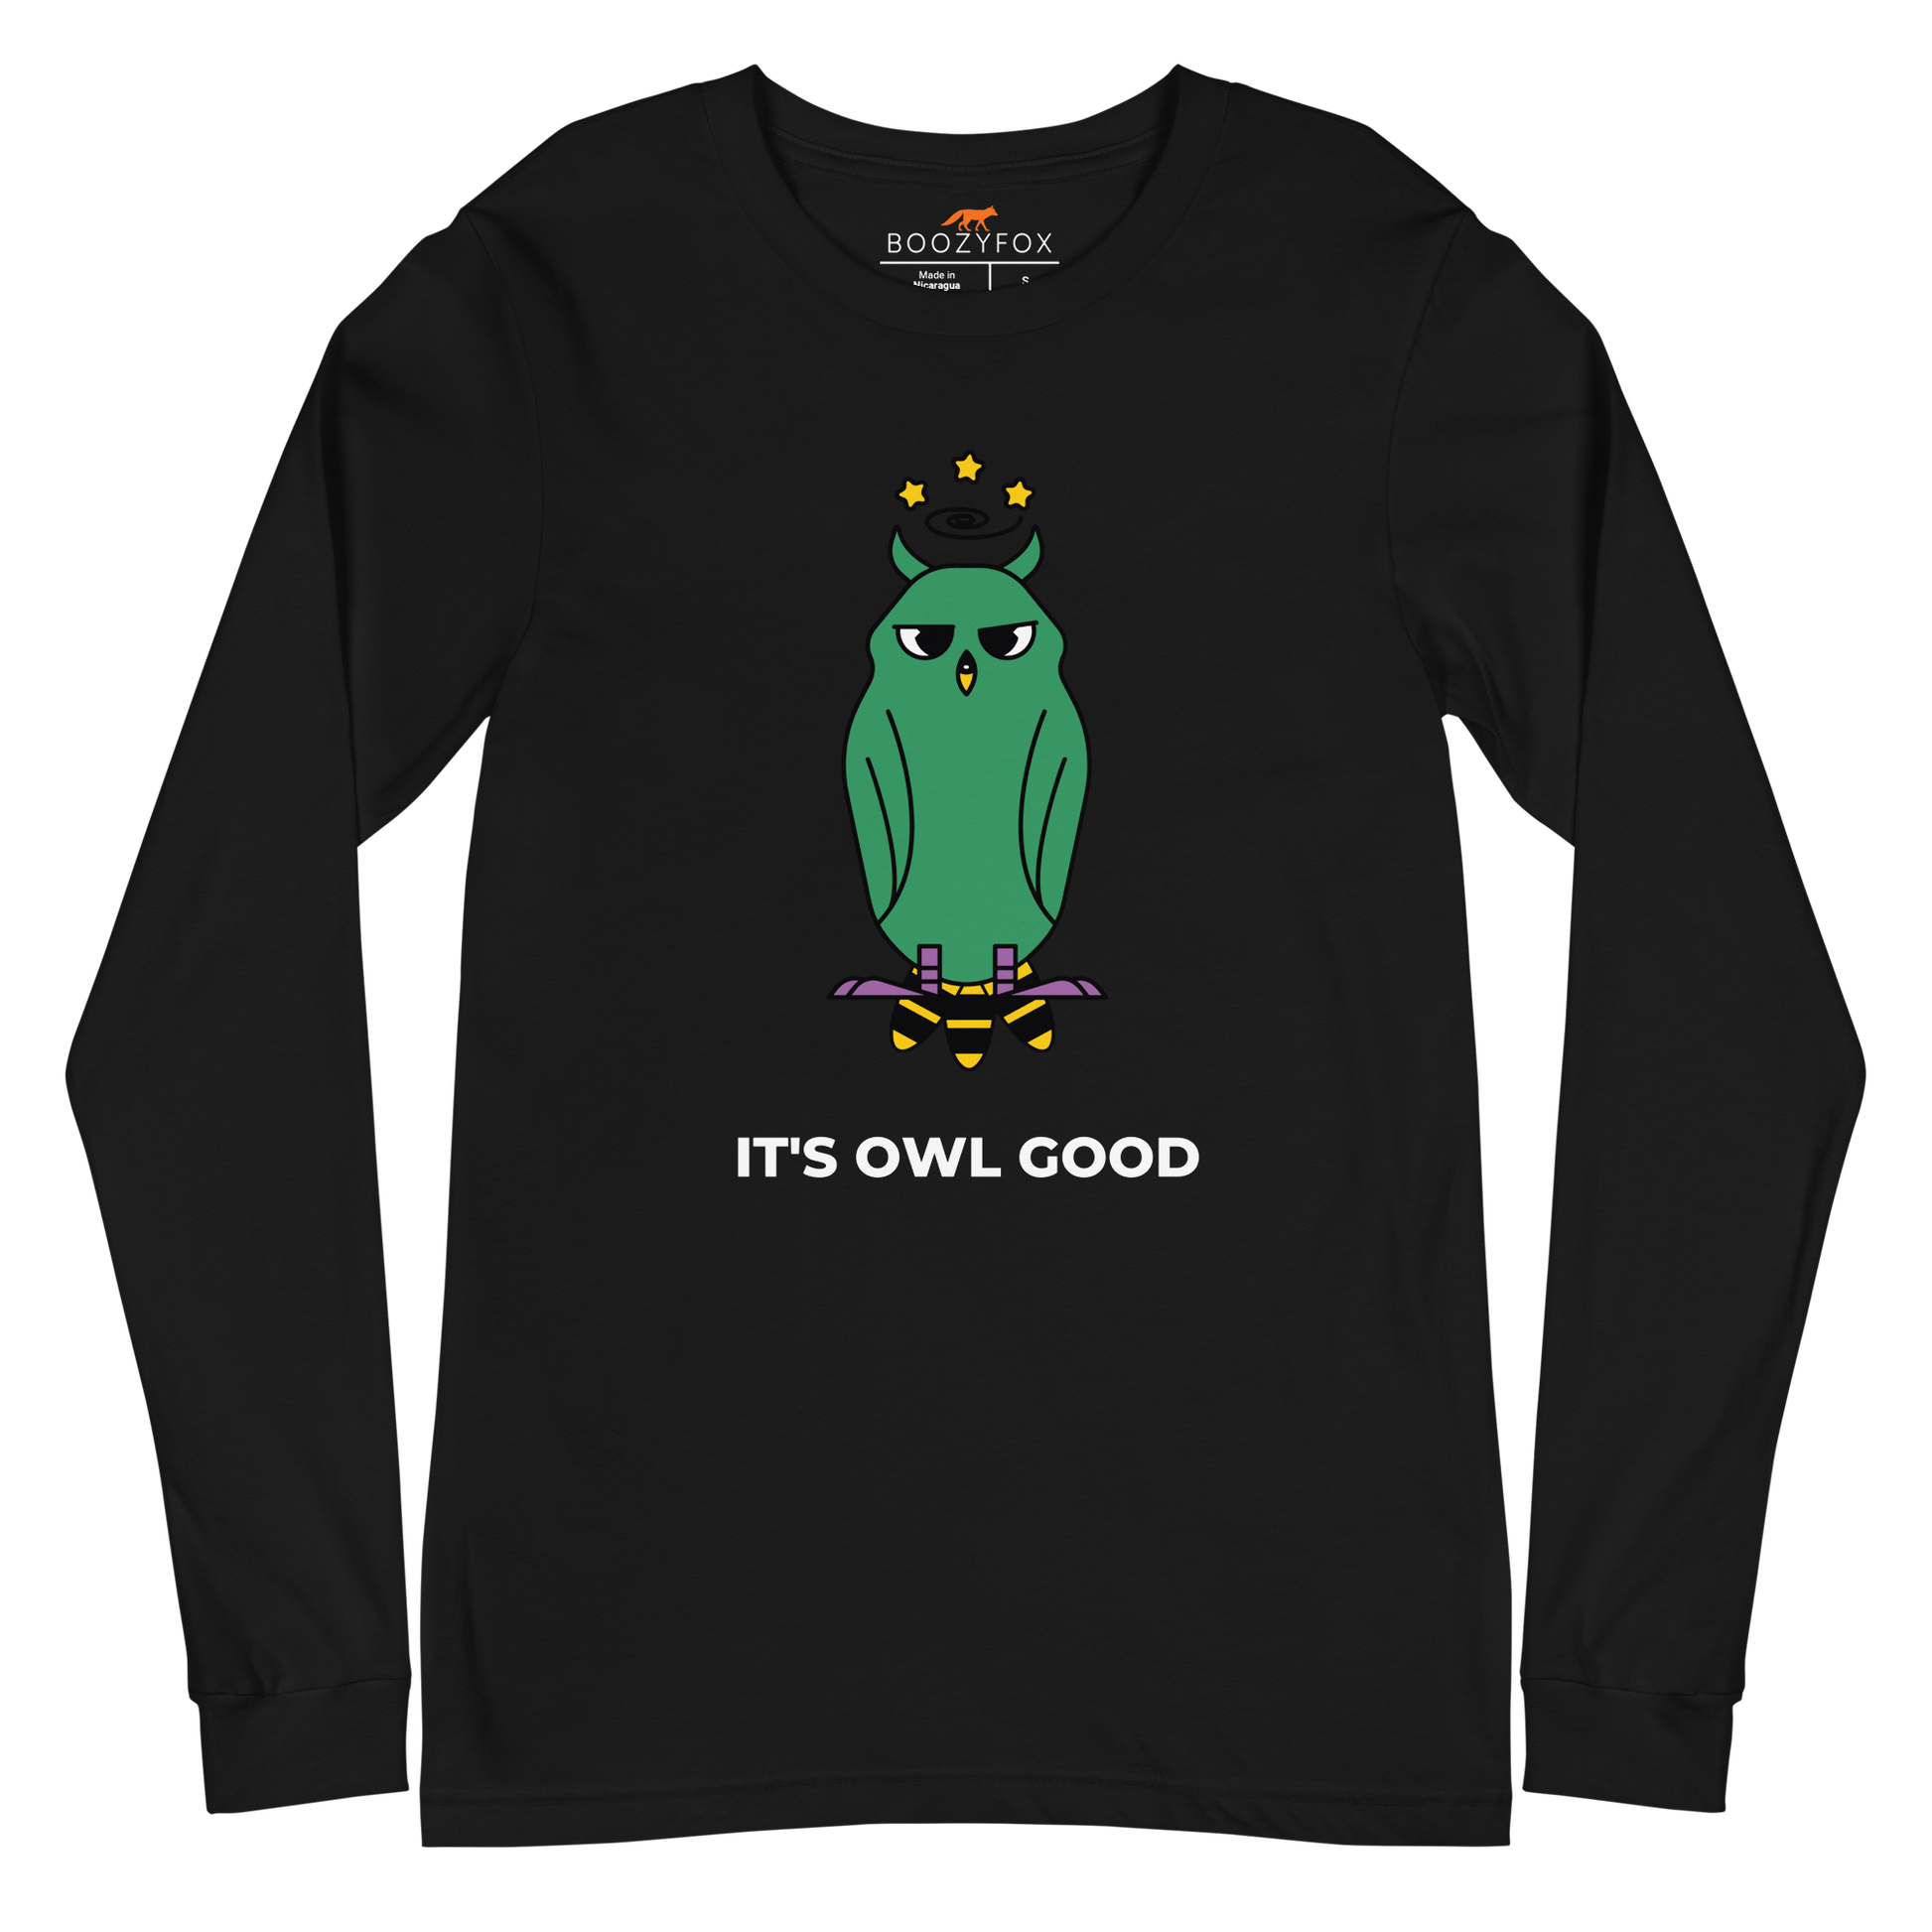 Black Owl Long Sleeve Tee featuring a captivating It's Owl Good graphic on the chest - Funny Owl Long Sleeve Graphic Tees - Boozy Fox